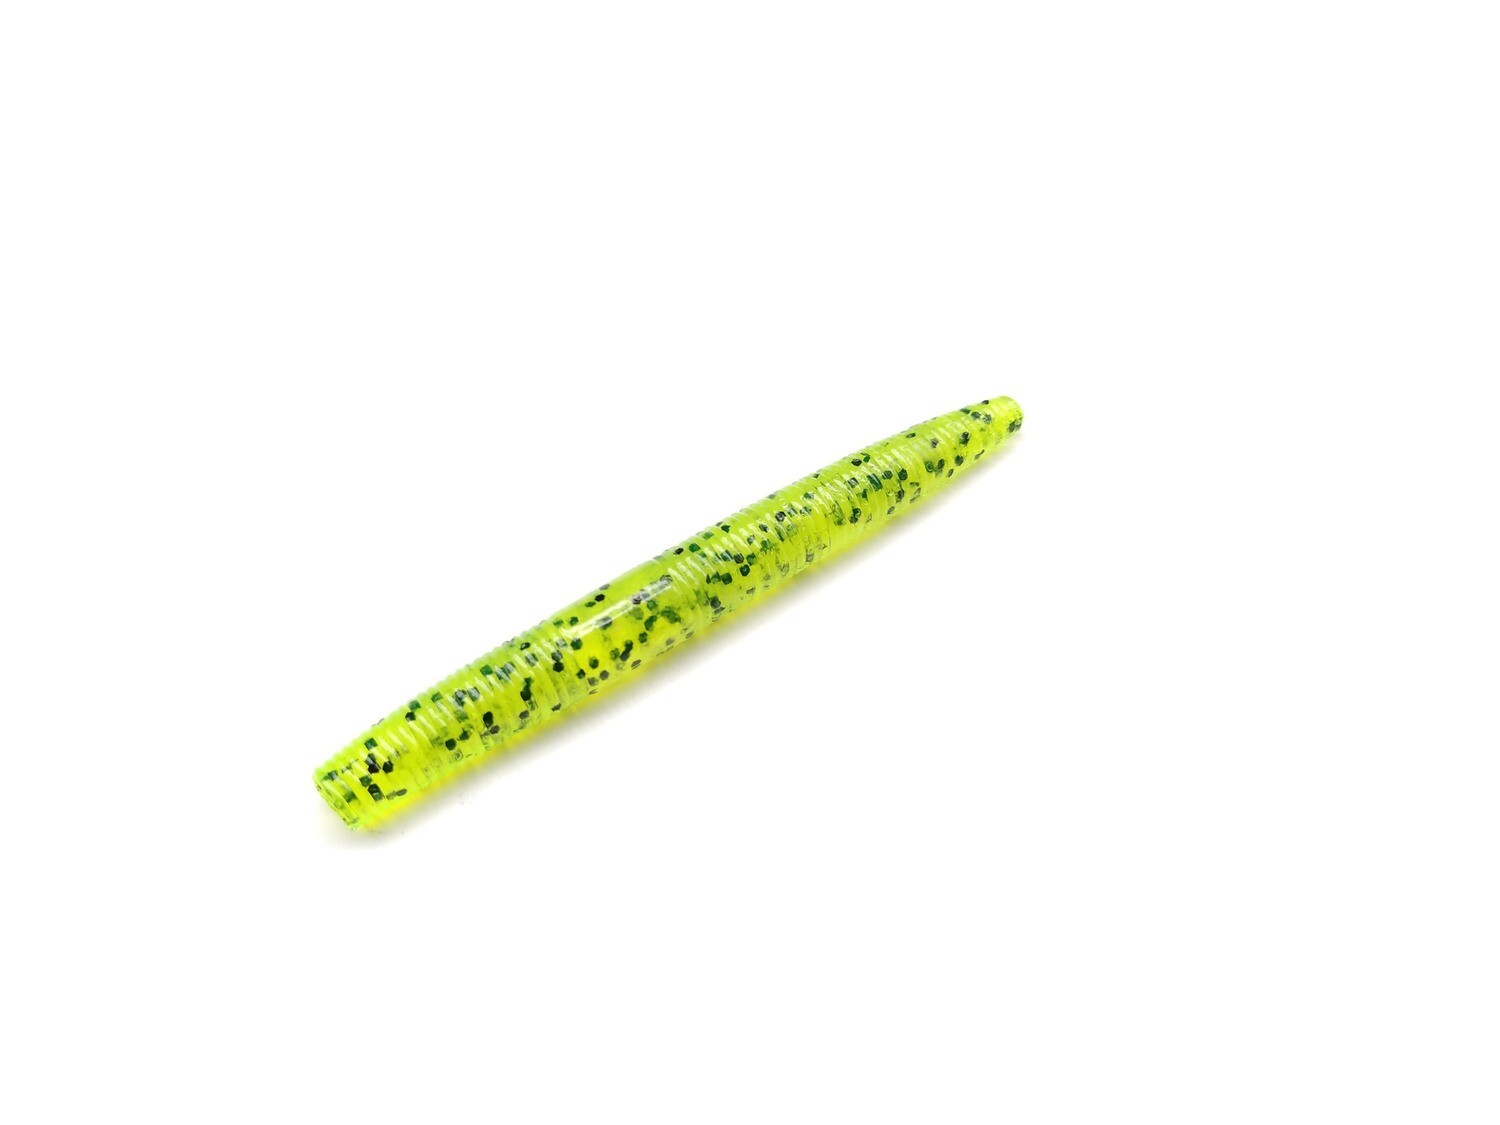 Senko Style Soft Plastic Fishing Worms – Dolittle and Fishmore